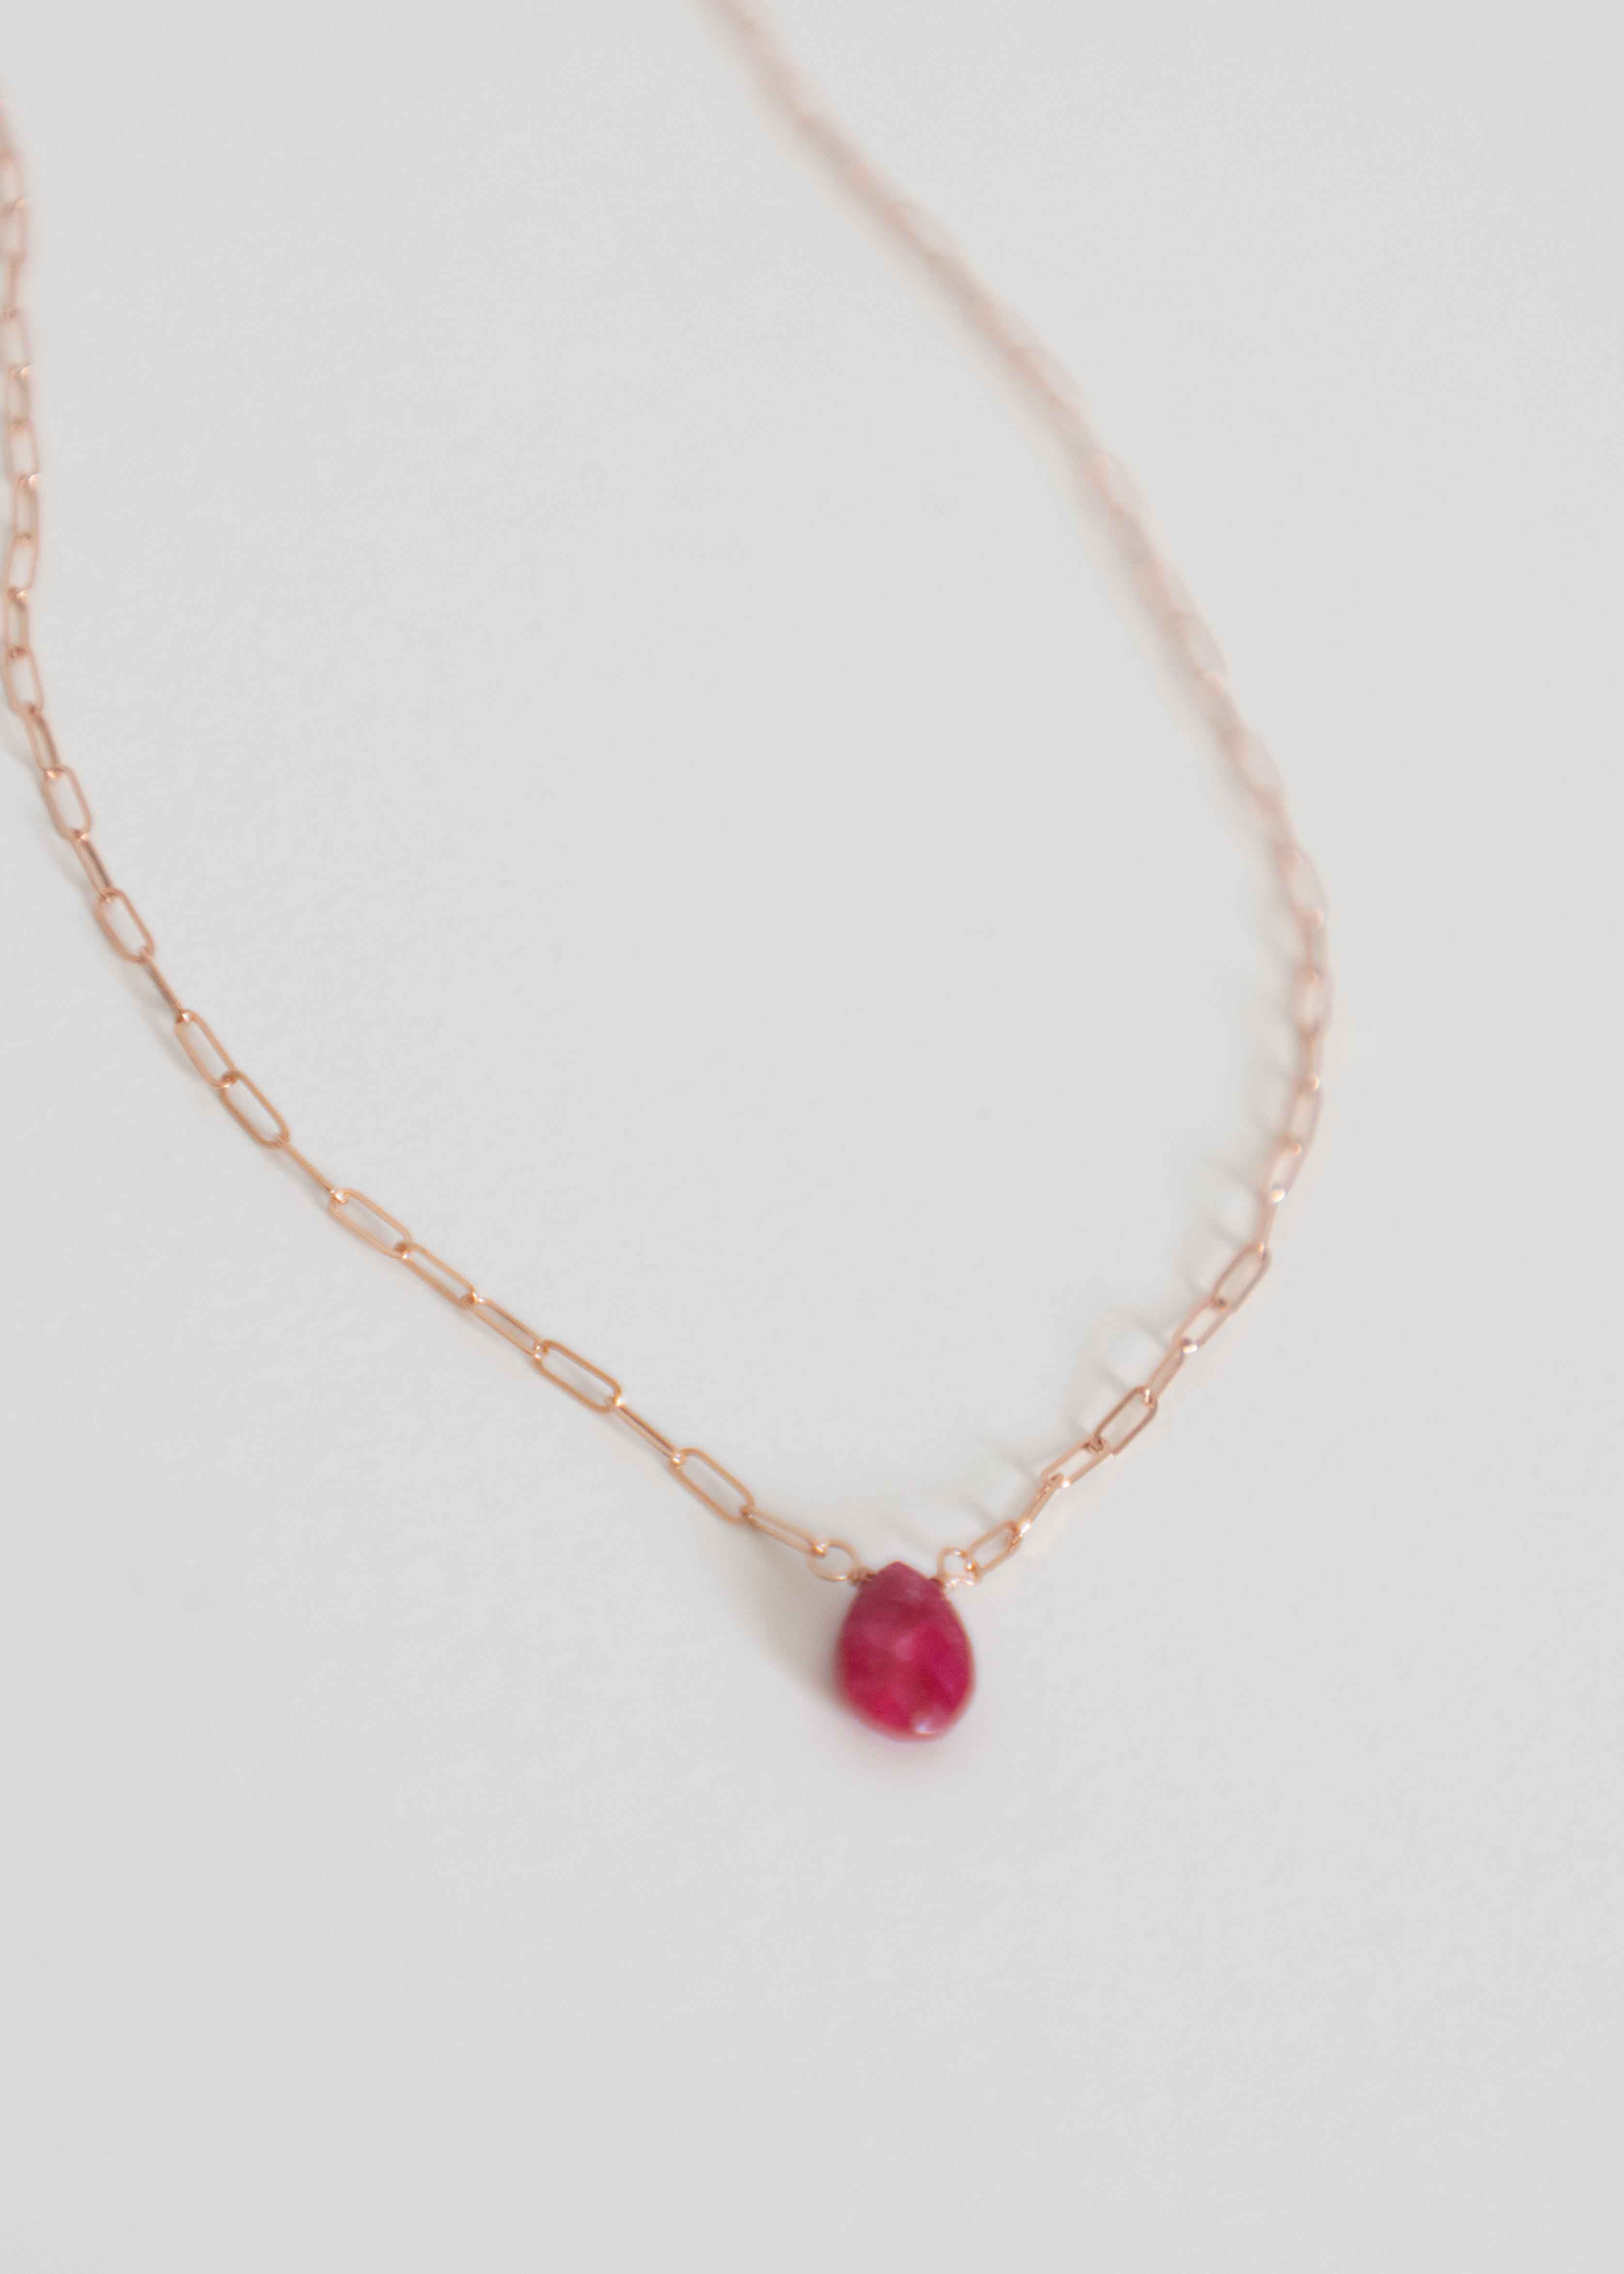 Buy Small Ruby Pendant, Dainty Ruby Necklace, Simple Ruby Jewelry, Ruby  Teardrop Necklace, Dainty Gold Ruby Jewelry, Tiny Ruby, Red Ruby Online in  India - Etsy